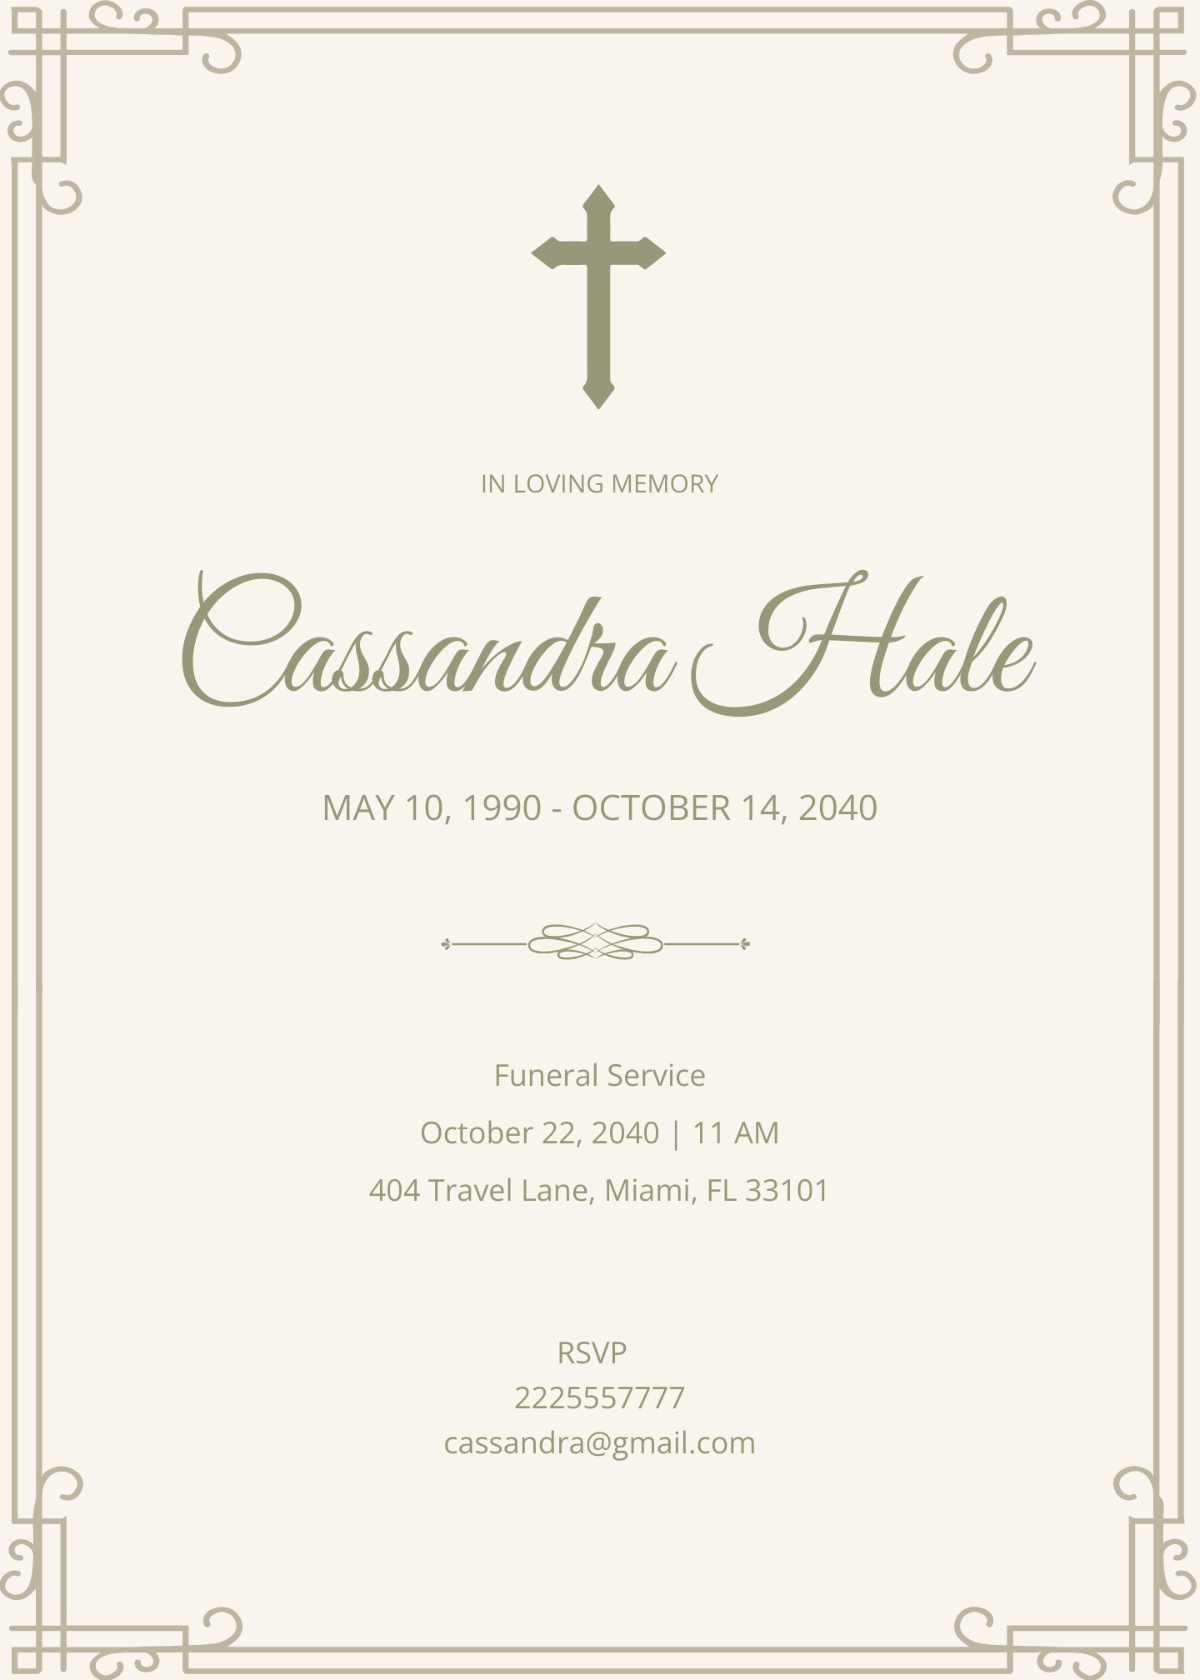 Traditional Catholic Funeral Card